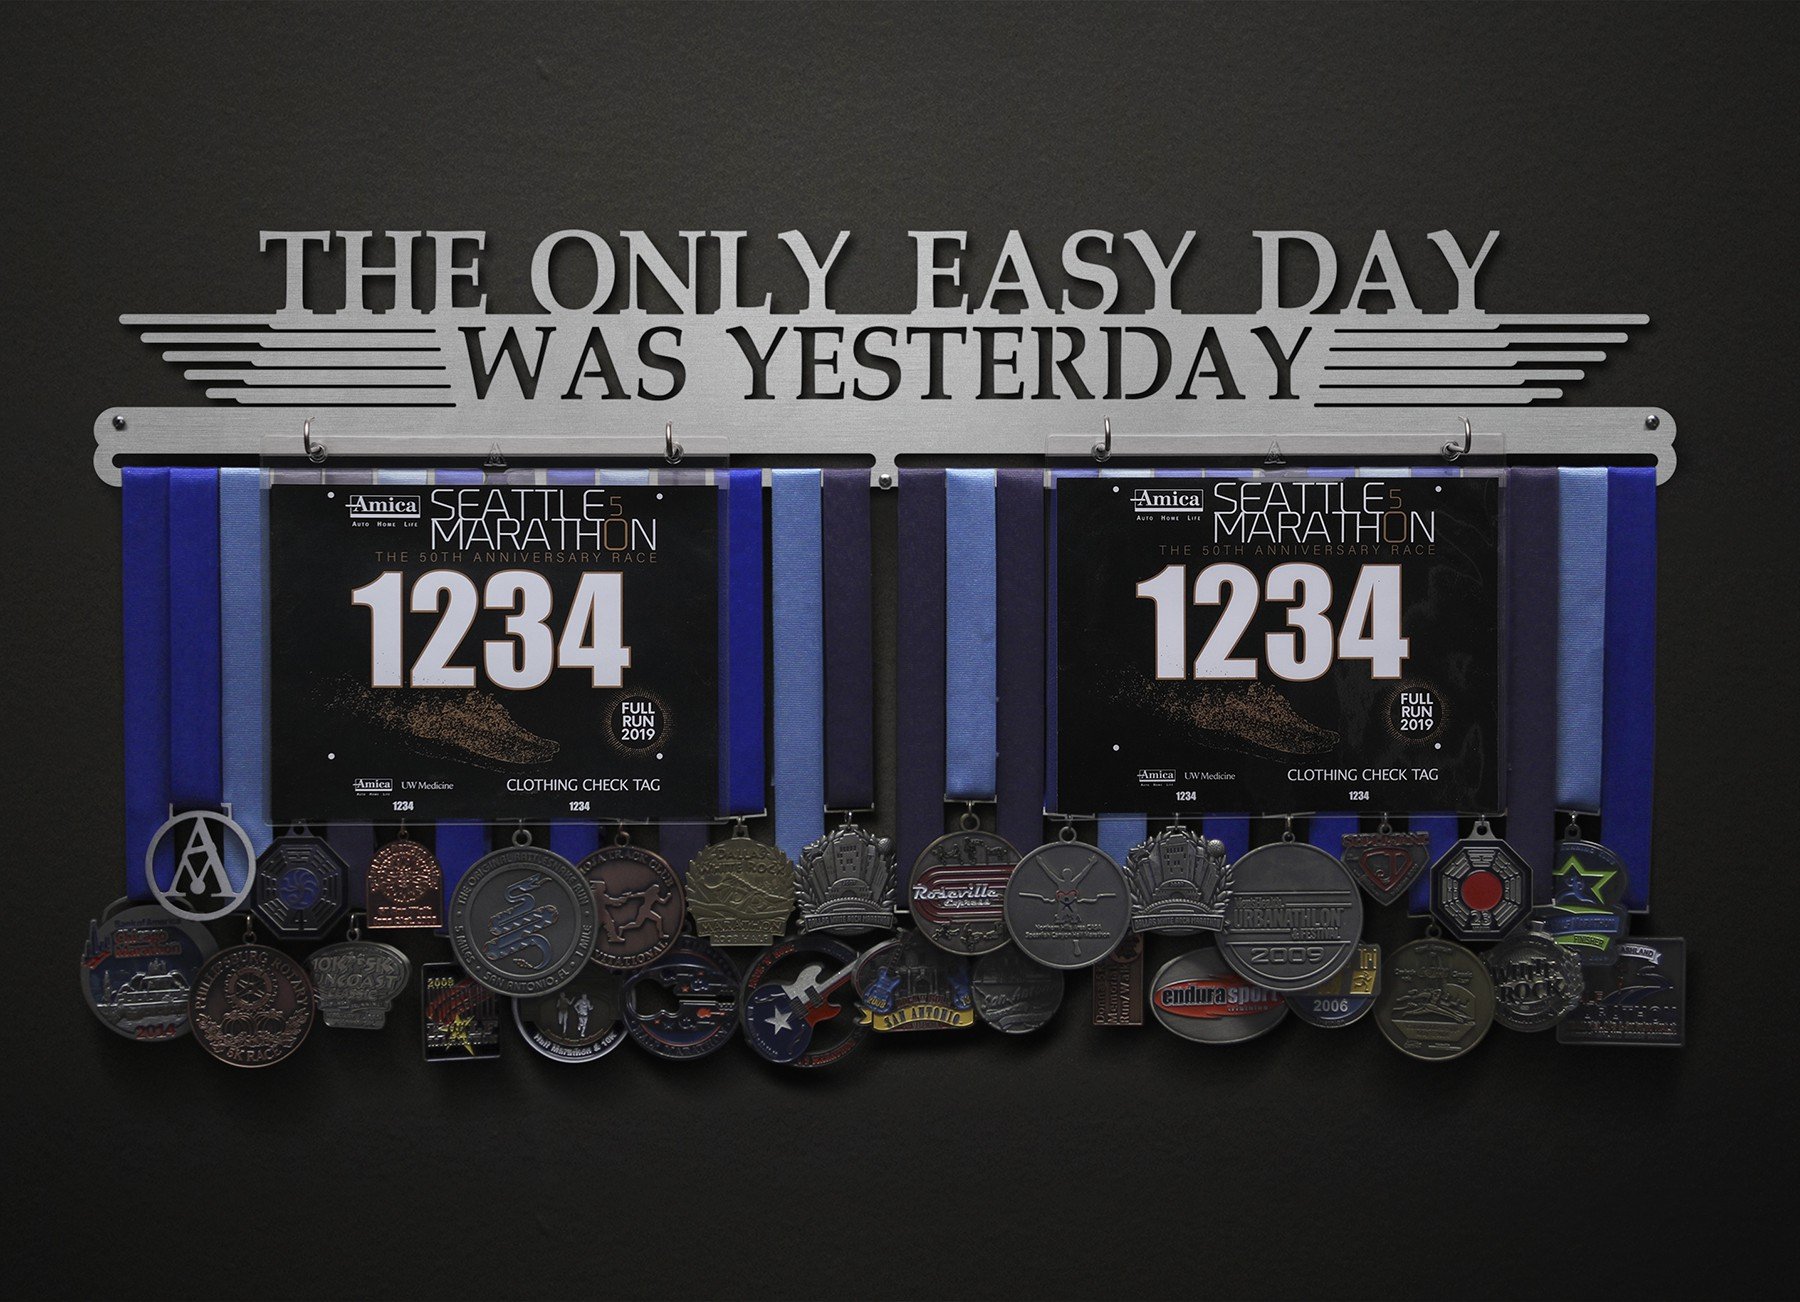 The Only Easy Day Was Yesterday Bib and Medal Display